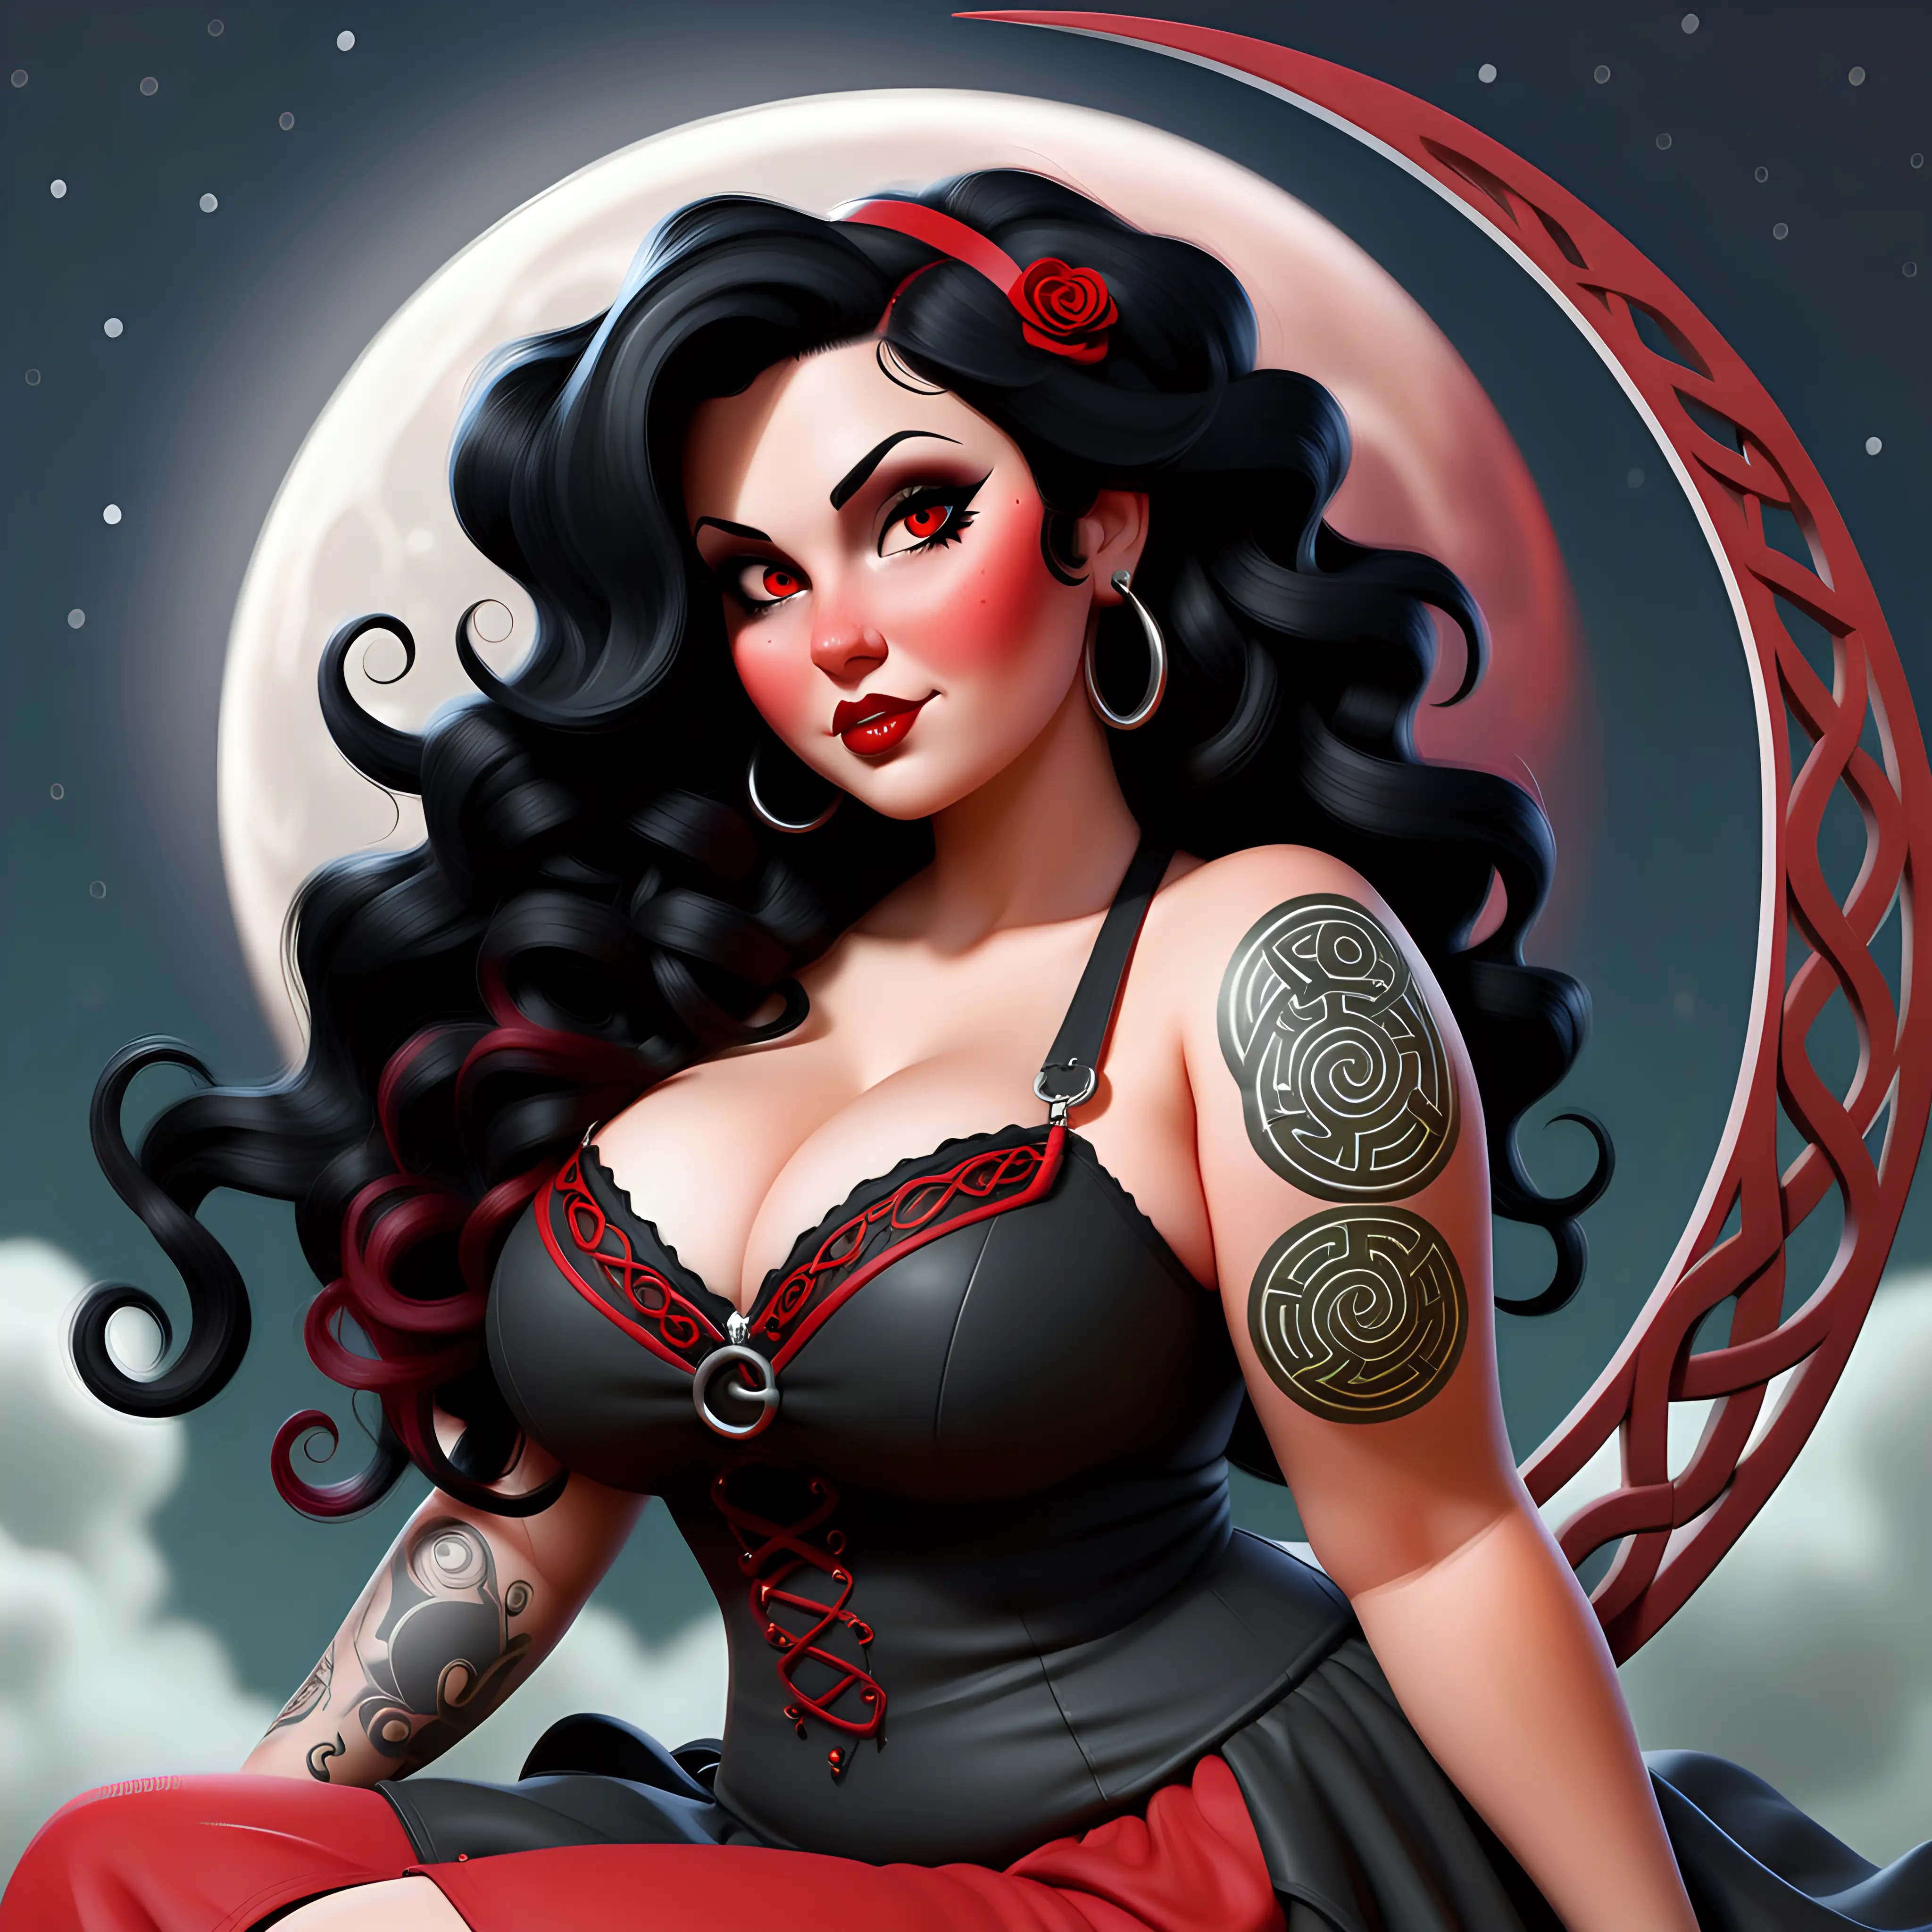 Curvy Rockabilly Woman with Red Highlights Sitting on Crescent Moon